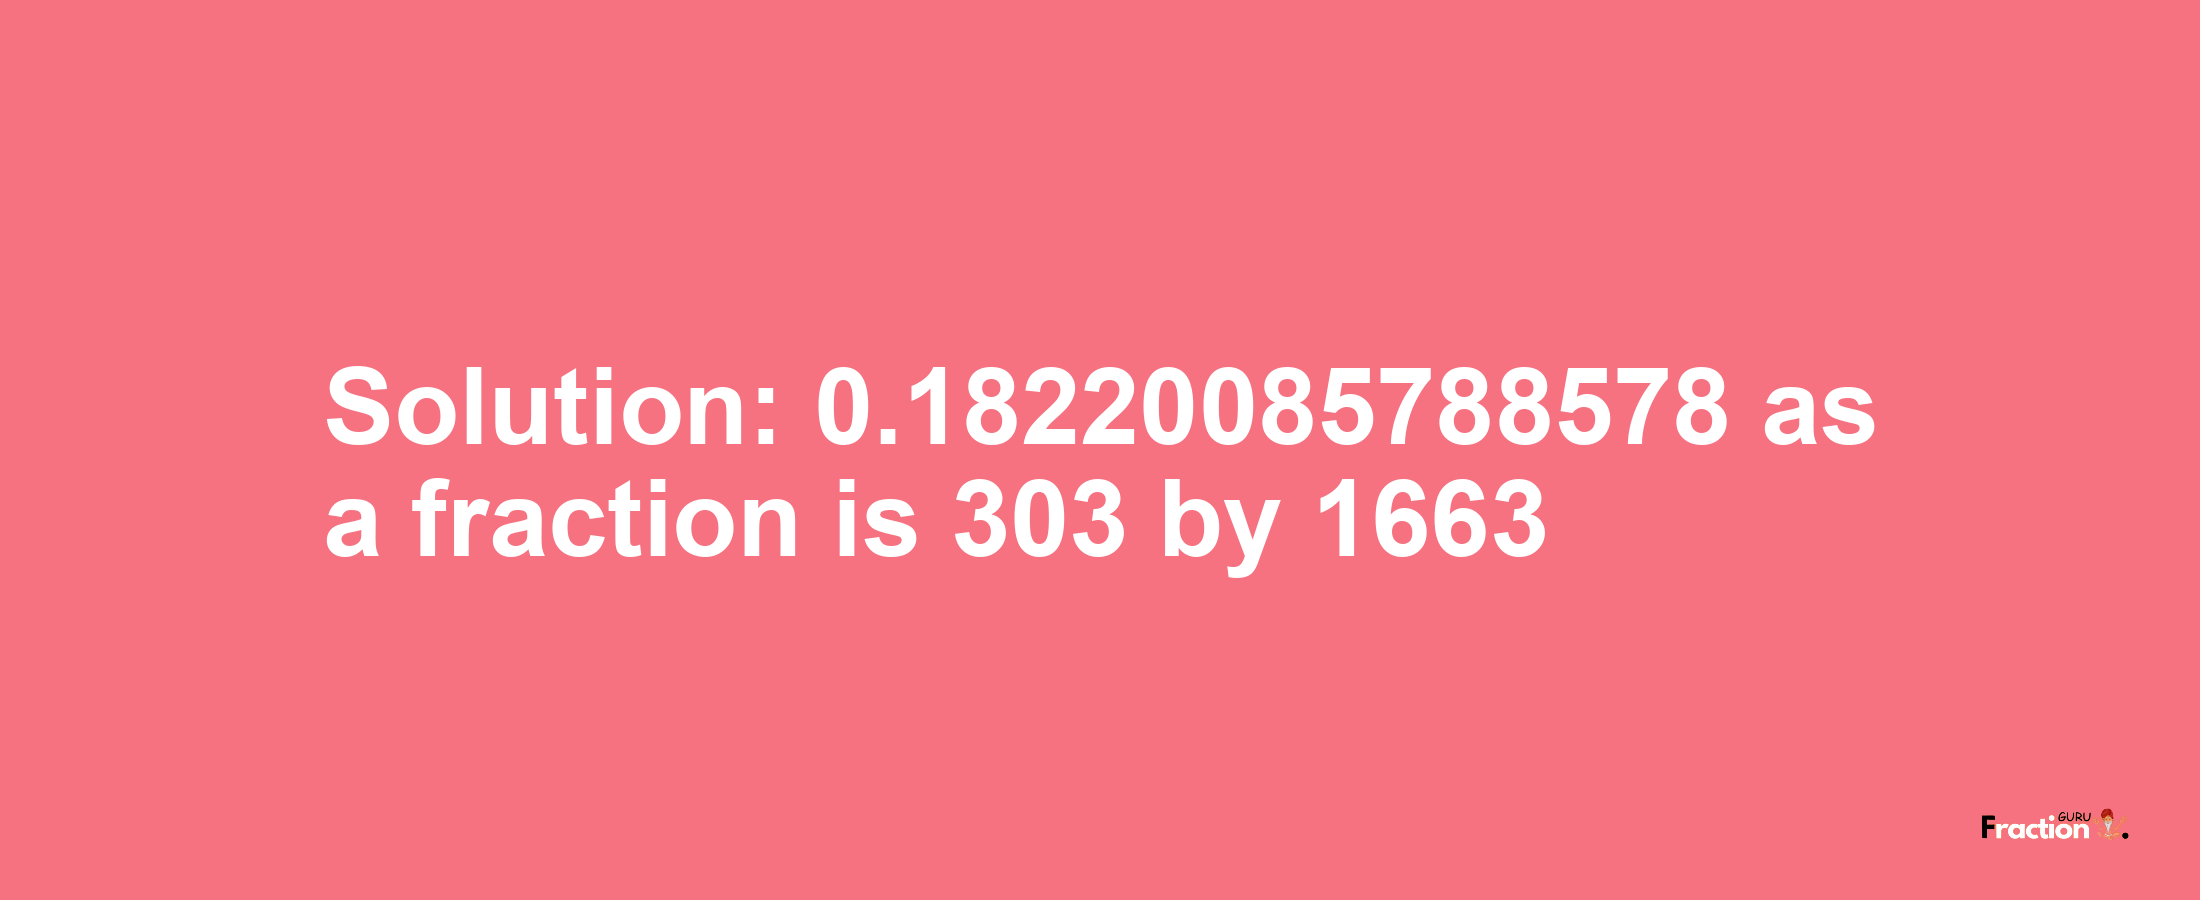 Solution:0.18220085788578 as a fraction is 303/1663